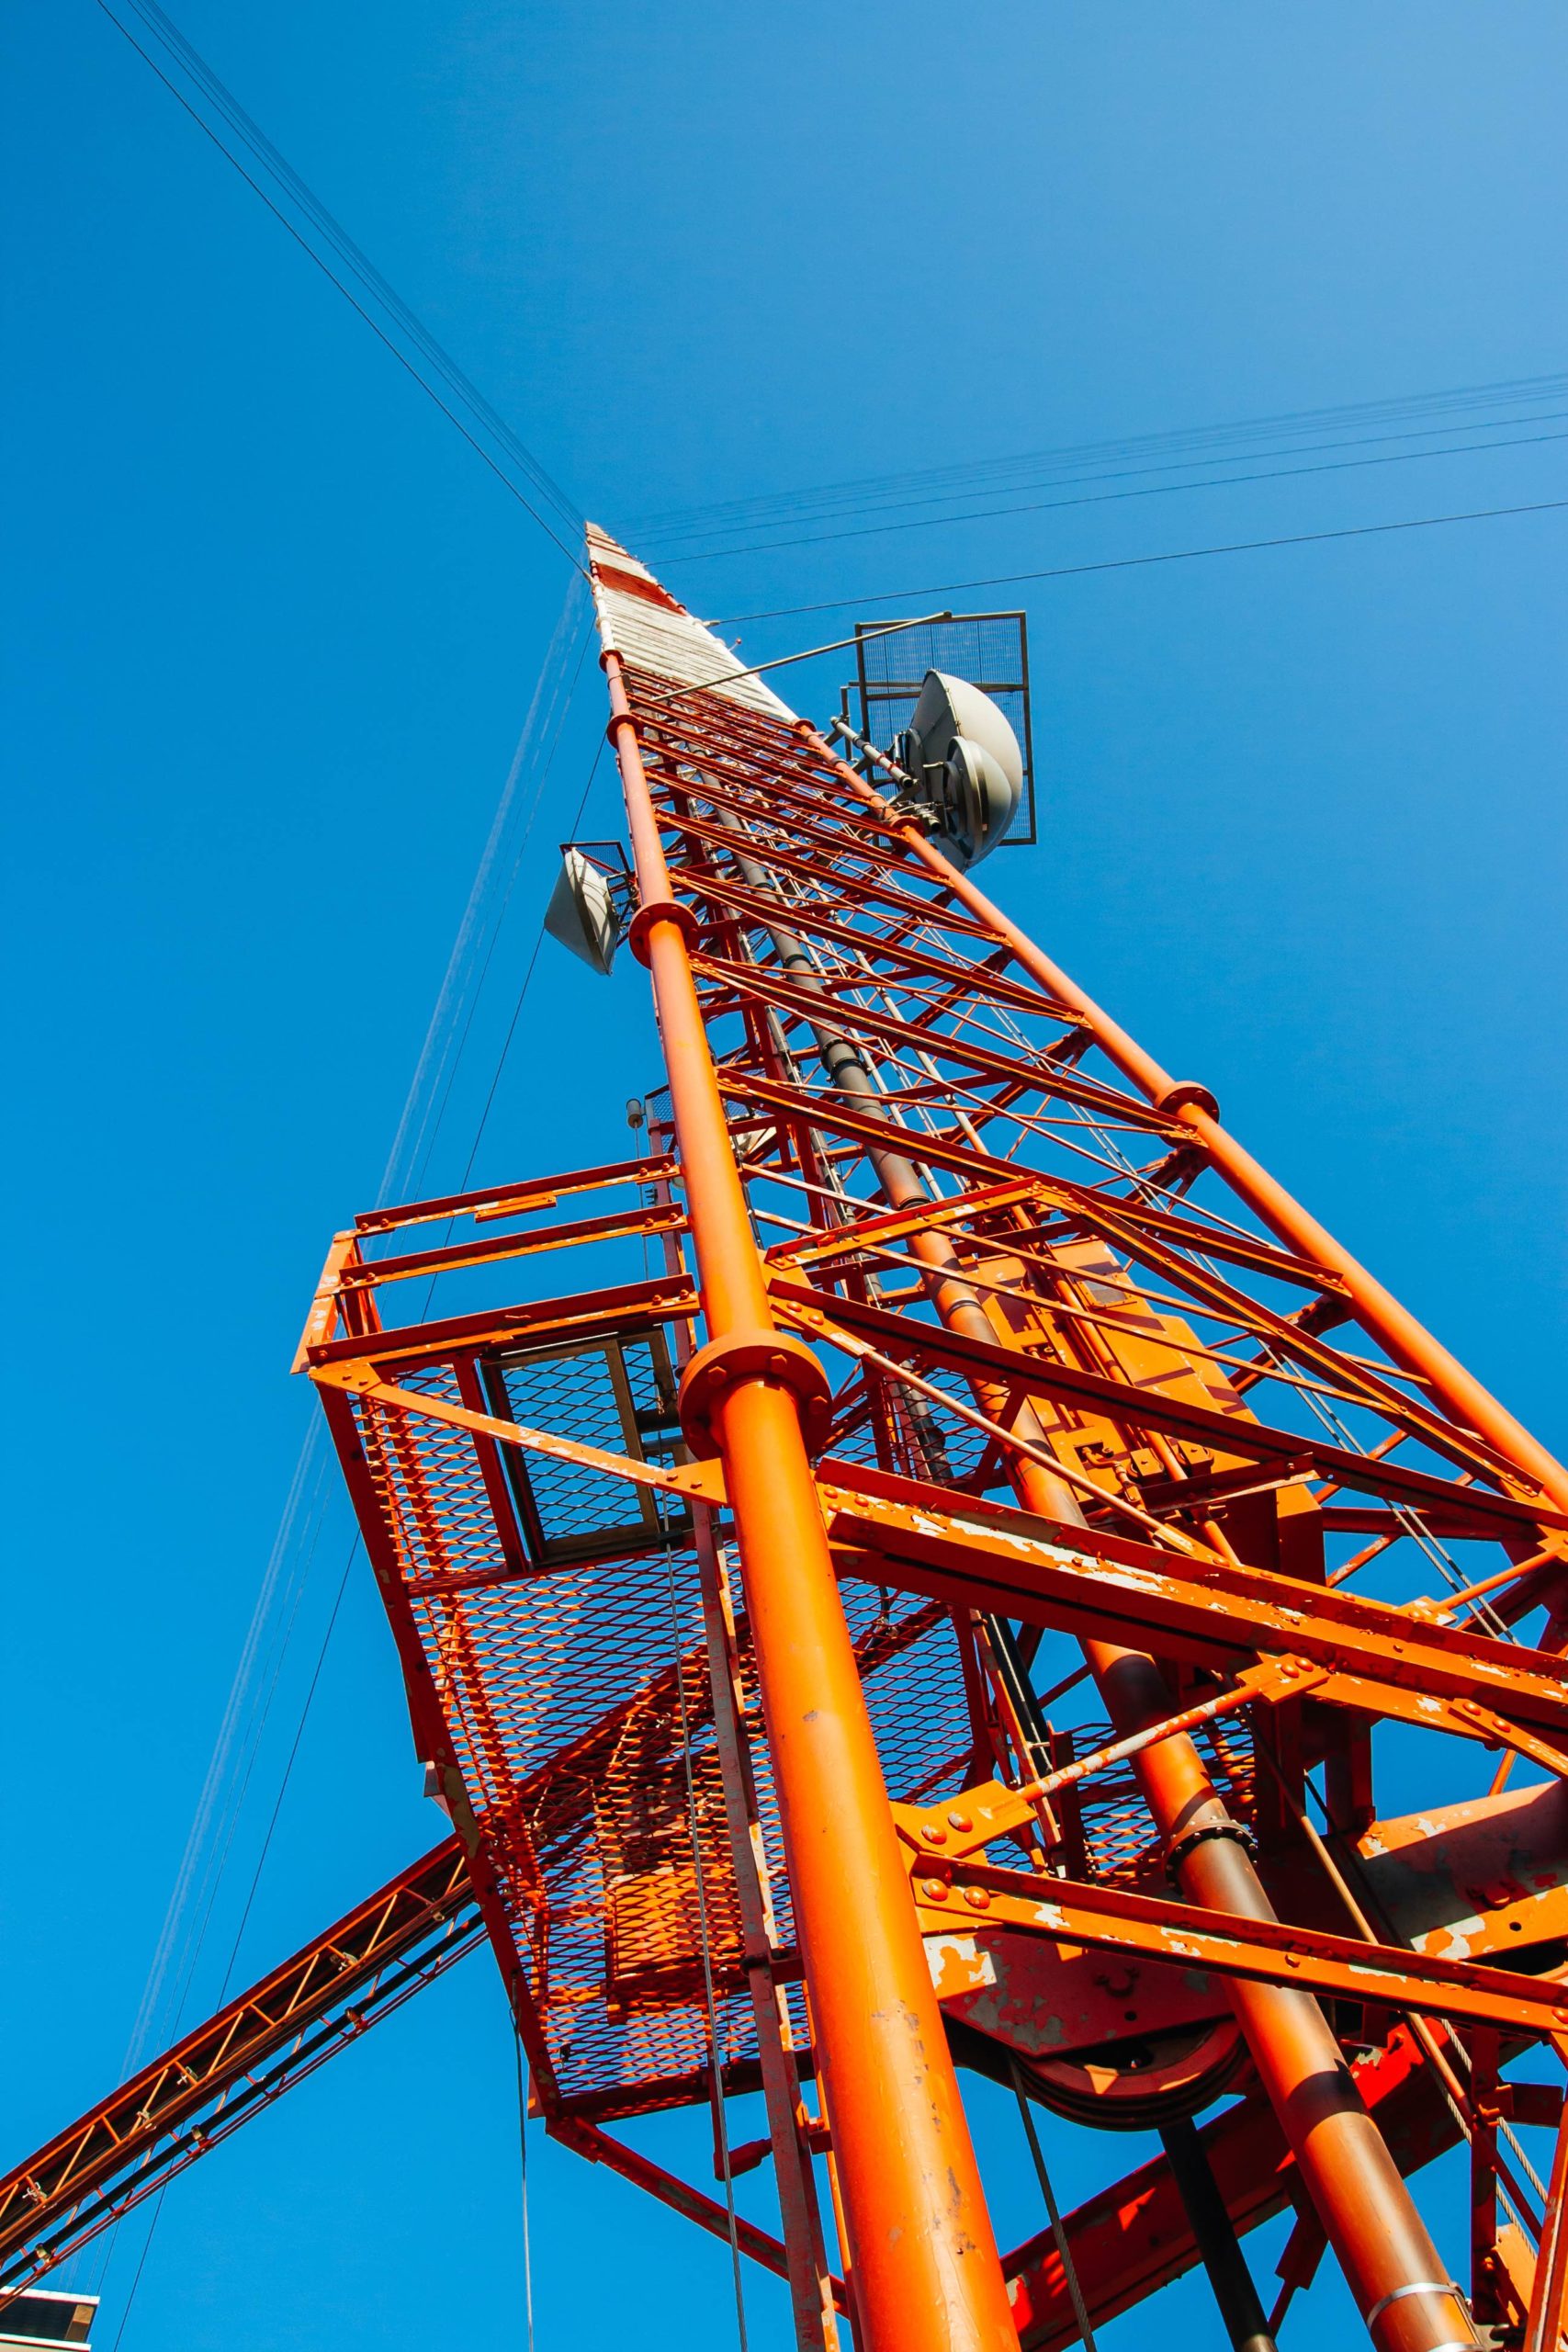 View of a large orange antenna from the ground